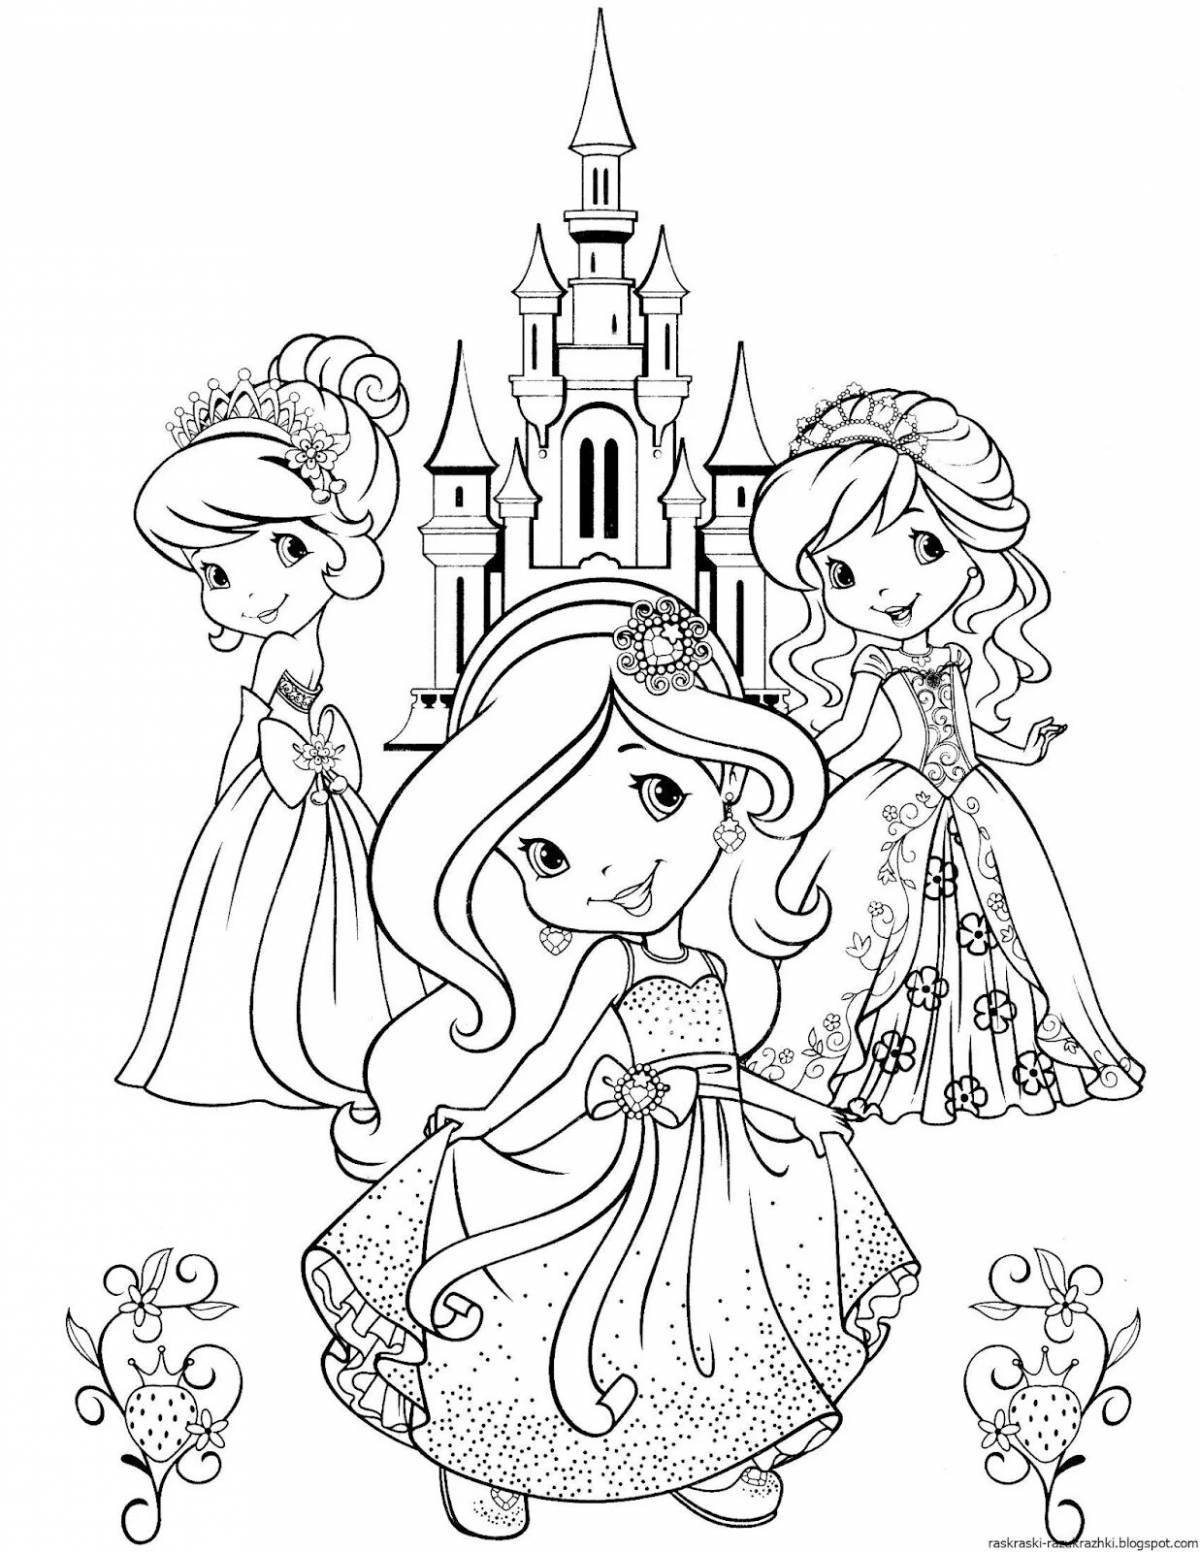 Violent princess coloring pages for girls 4-5 years old